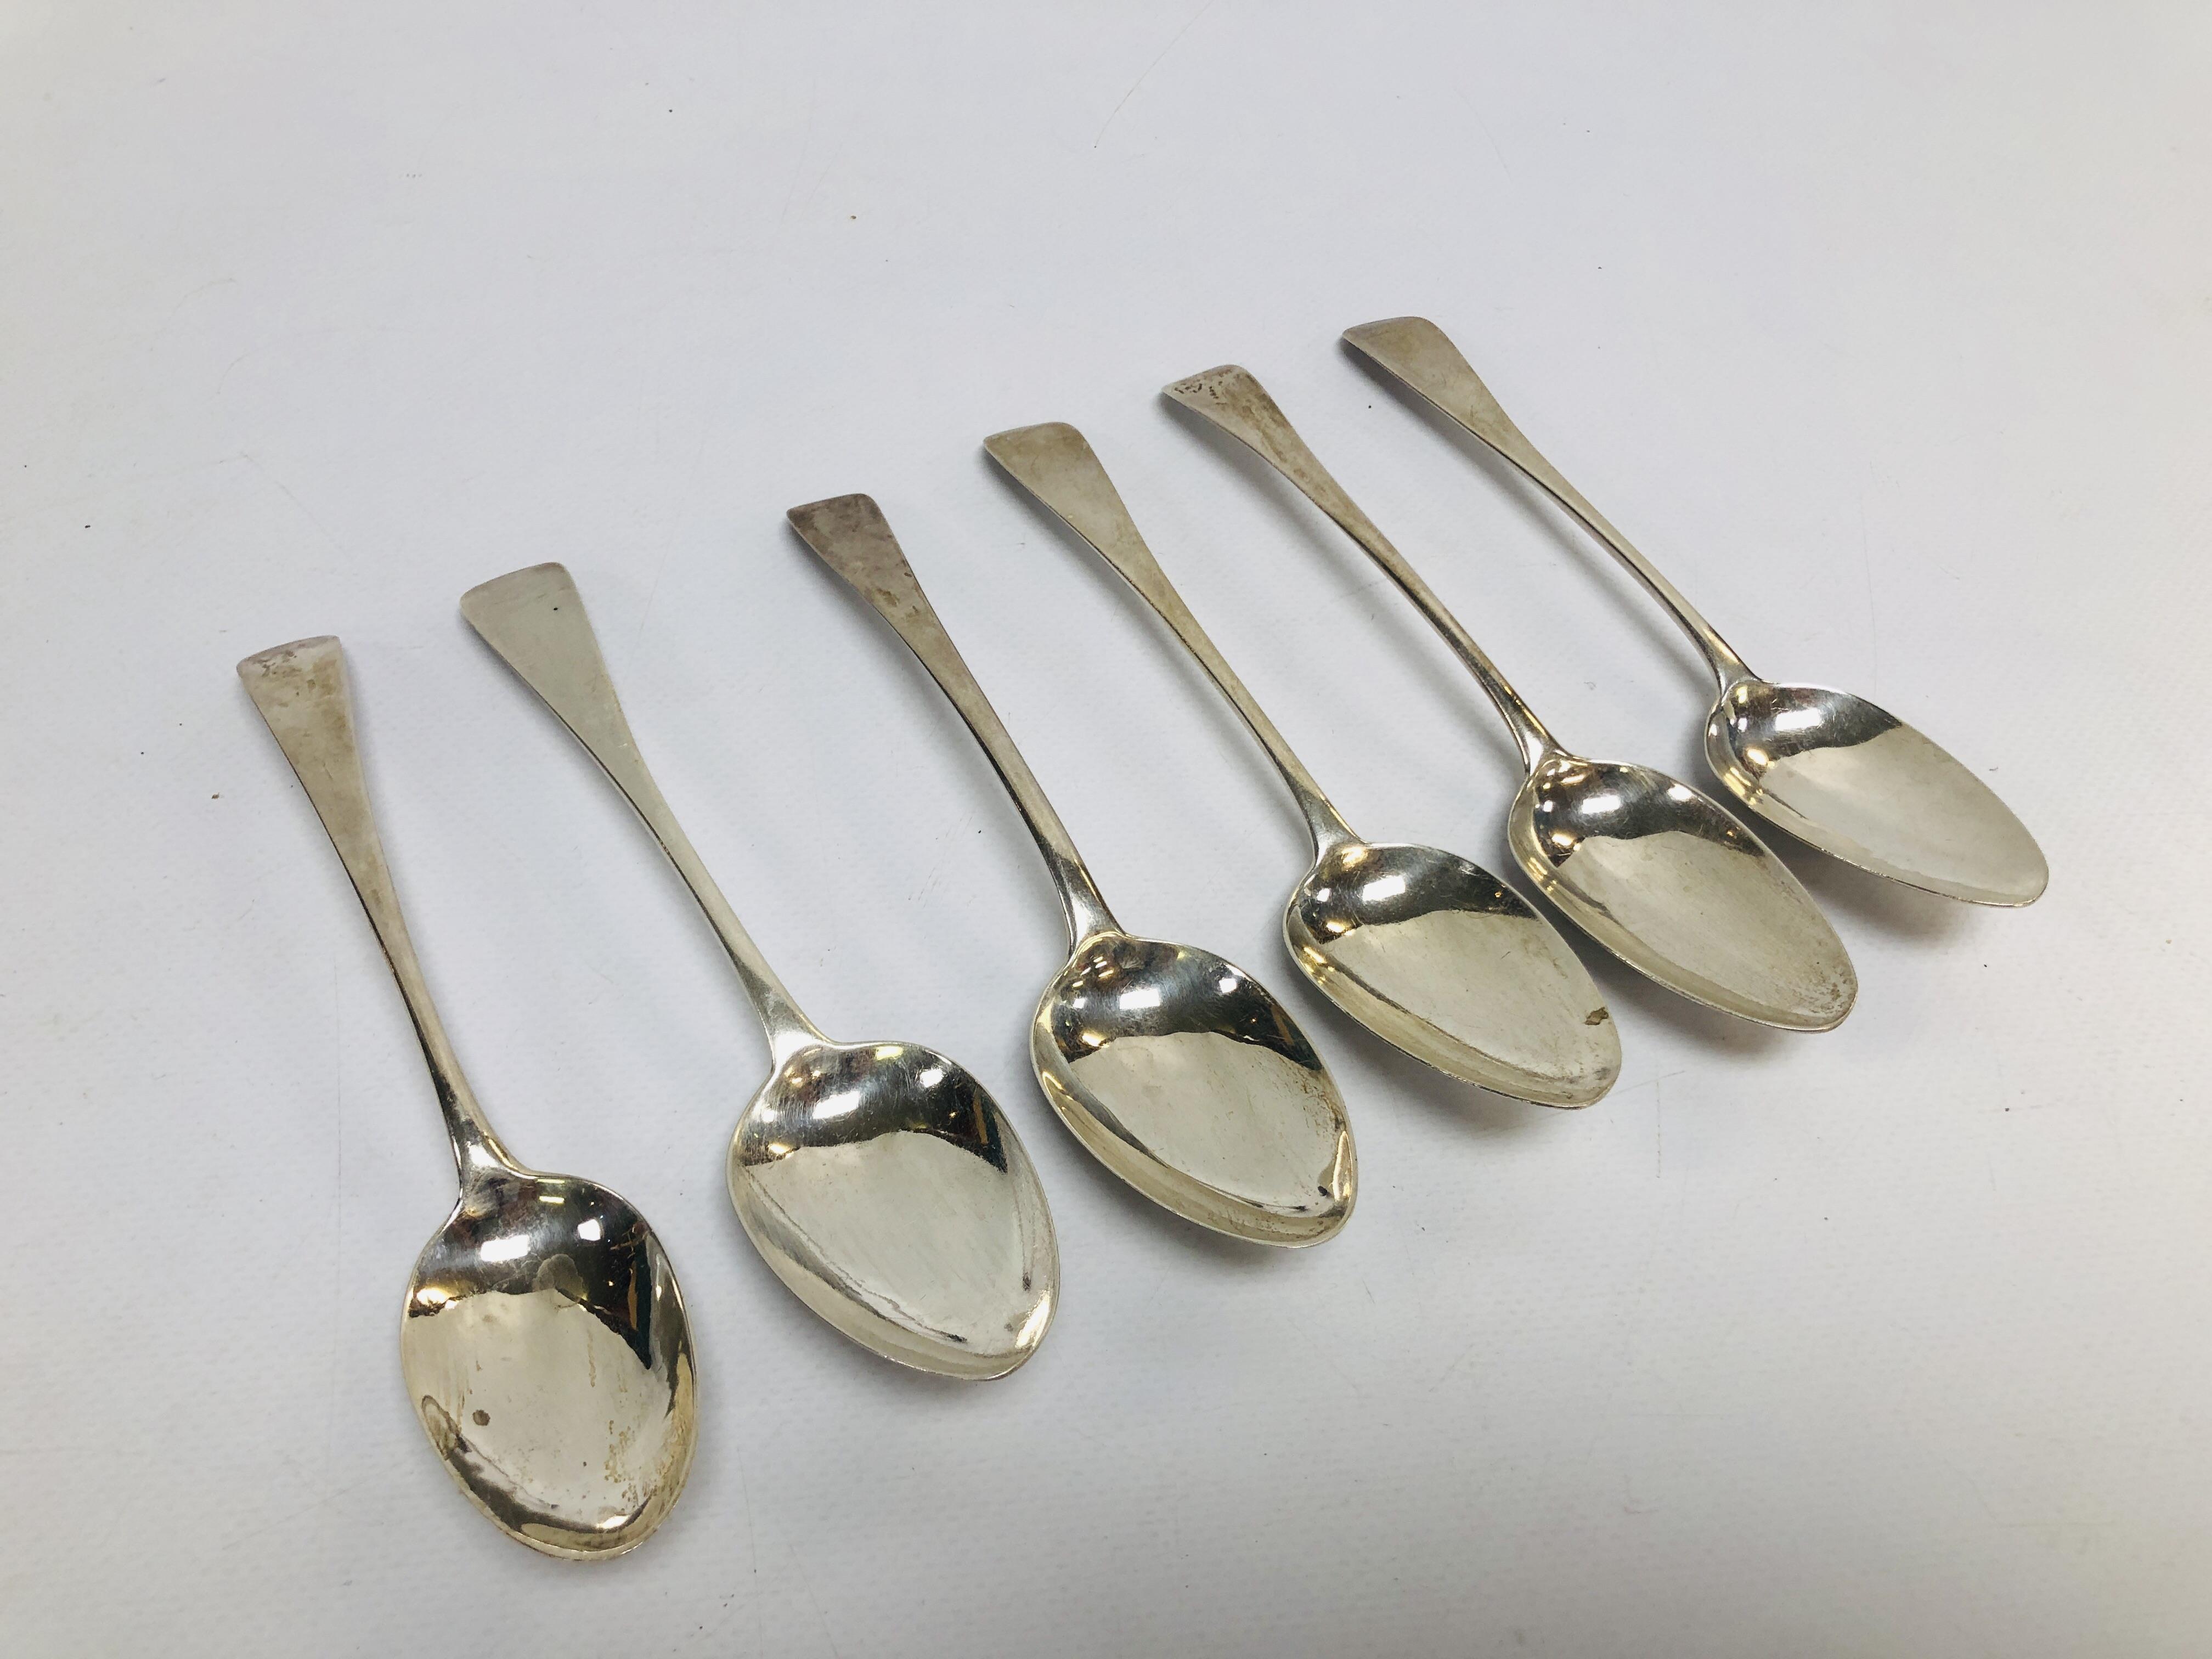 A MATCHED SET OF SIX OLD ENGLISH PATTERN DESSERT SPOONS, GEORGIAN WITH DIFFERENT DATES AND MAKERS.